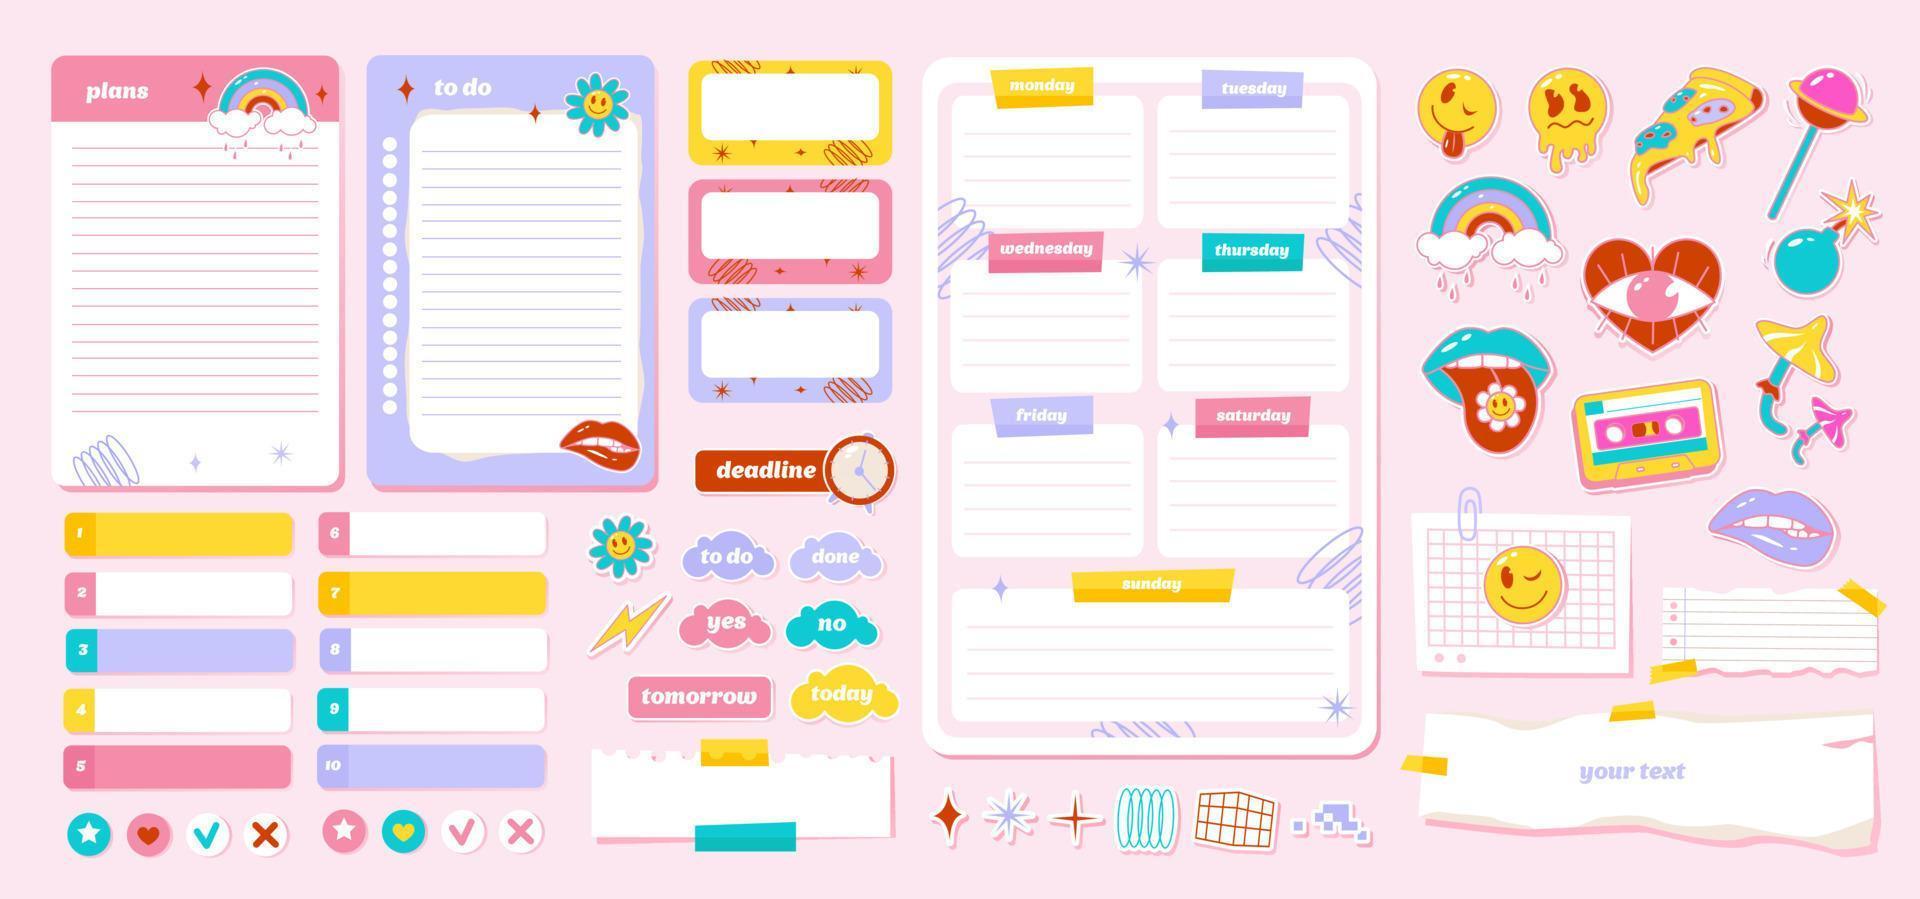 Planner with stickers and notebook label in vaporwave style of the 90s and Y2K style  elements. Vector illustration